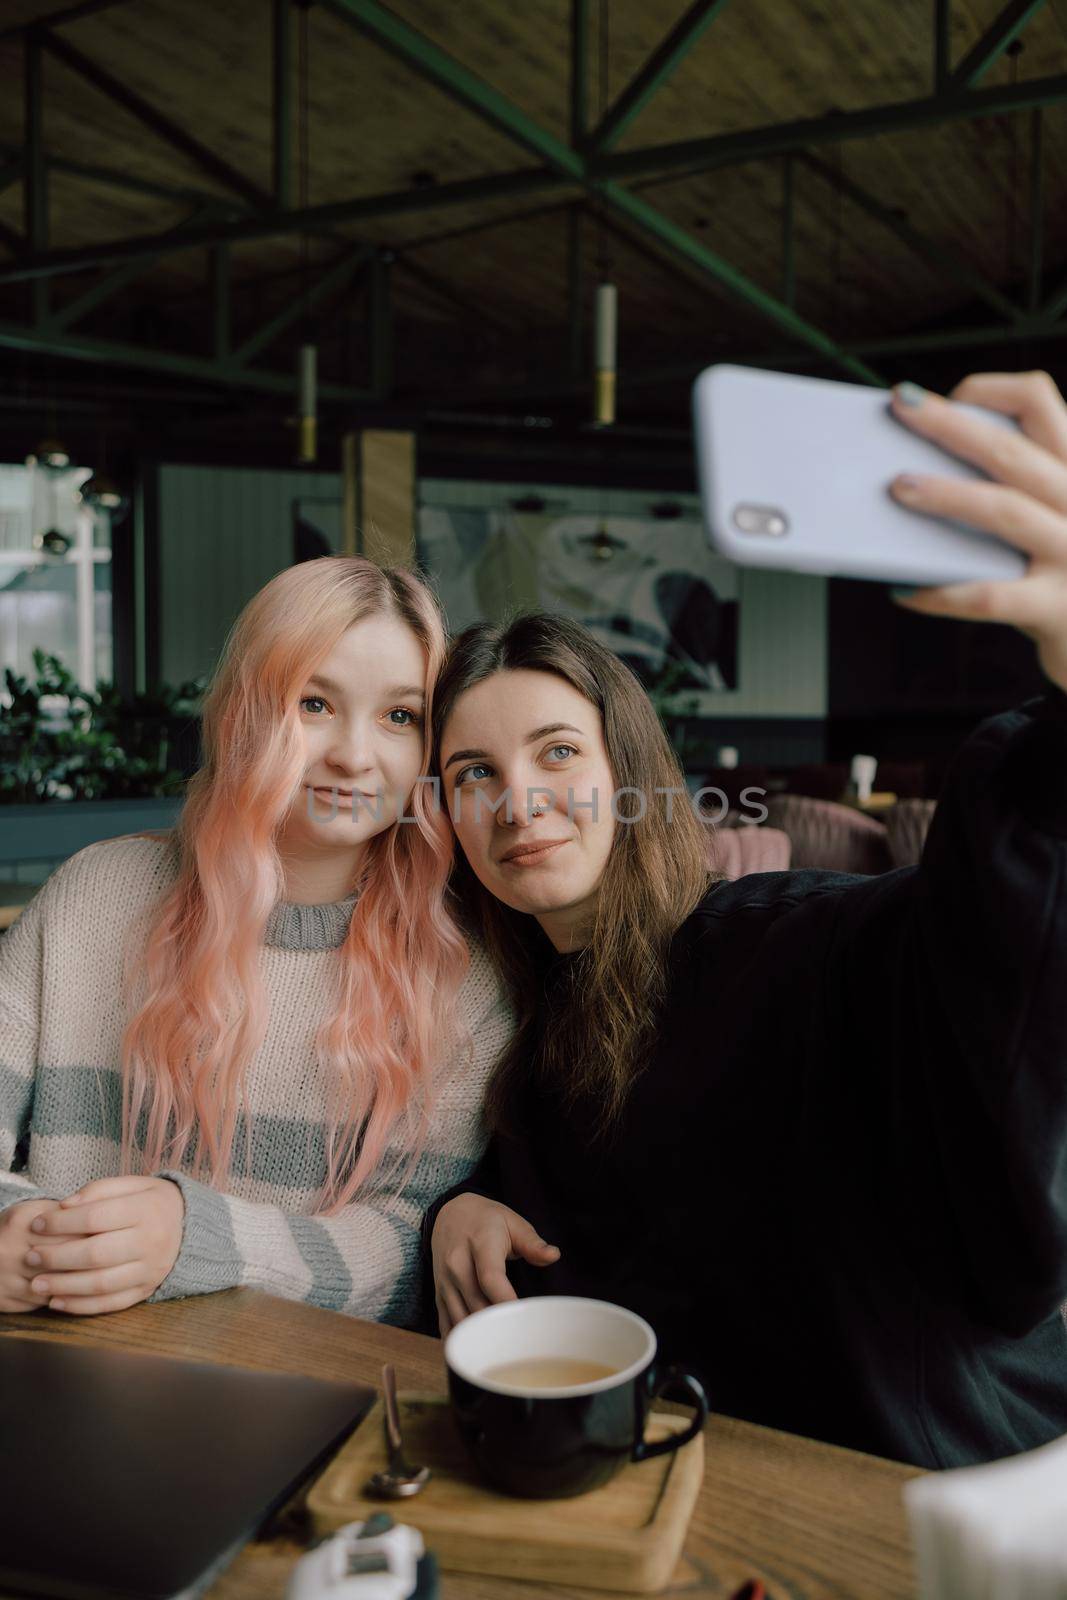 Cheerful young lesbian couple selfie using mobile phone at a coffee shop. Two joyful attractive Asian girls together at restaurant or cafe. Holiday activity, or modern lifestyle concept.